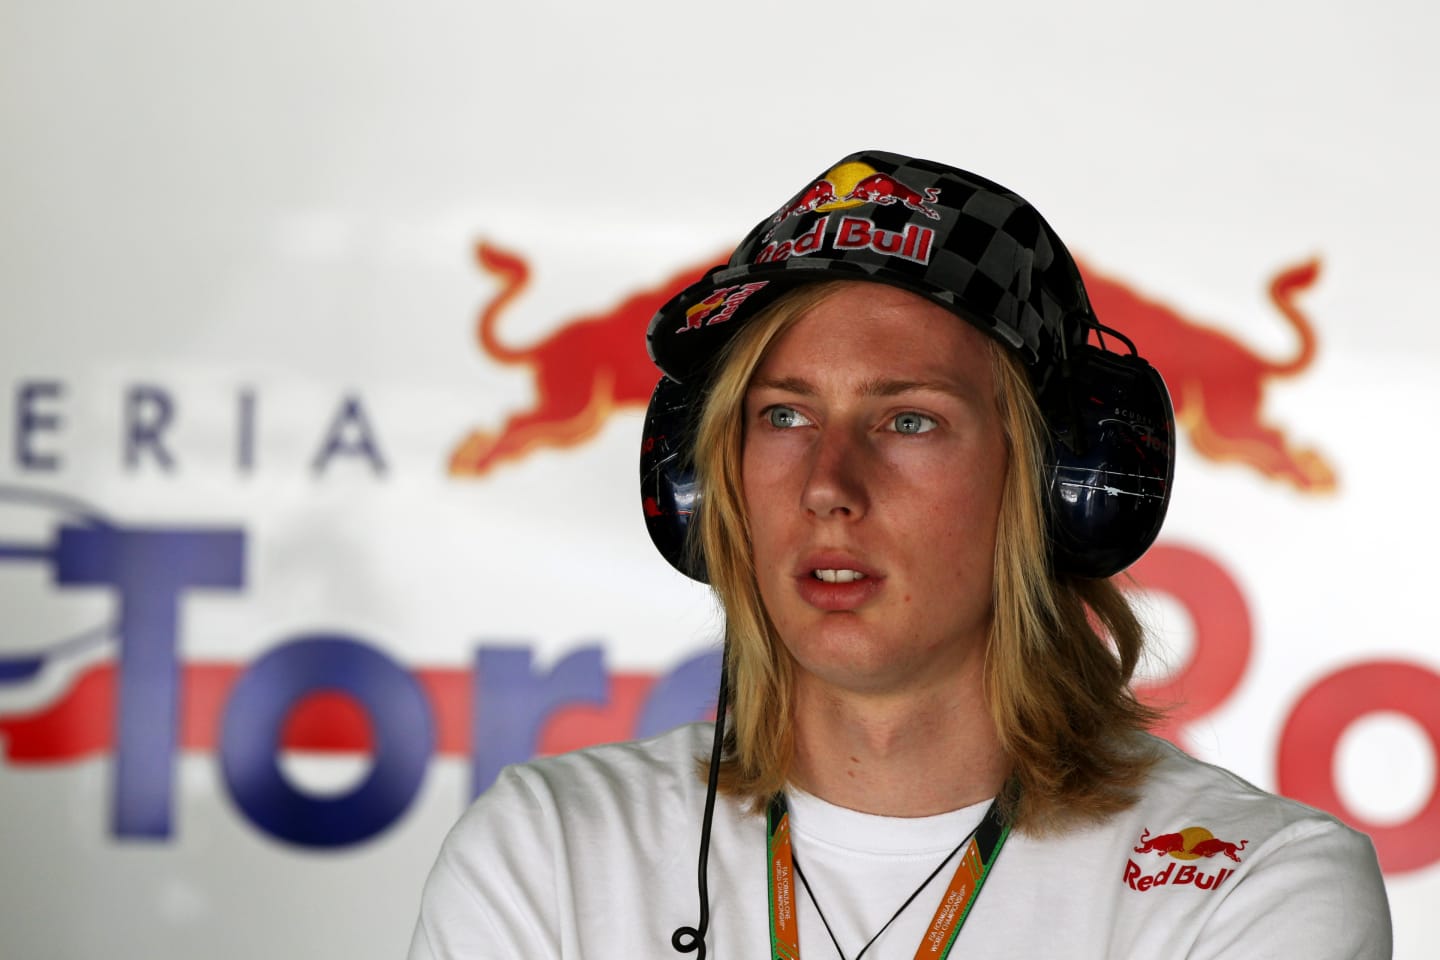 Brendon Hartley (NZL) Red Bull Racing and Scuderia Toro Rosso Reserve Driver.
Formula One World